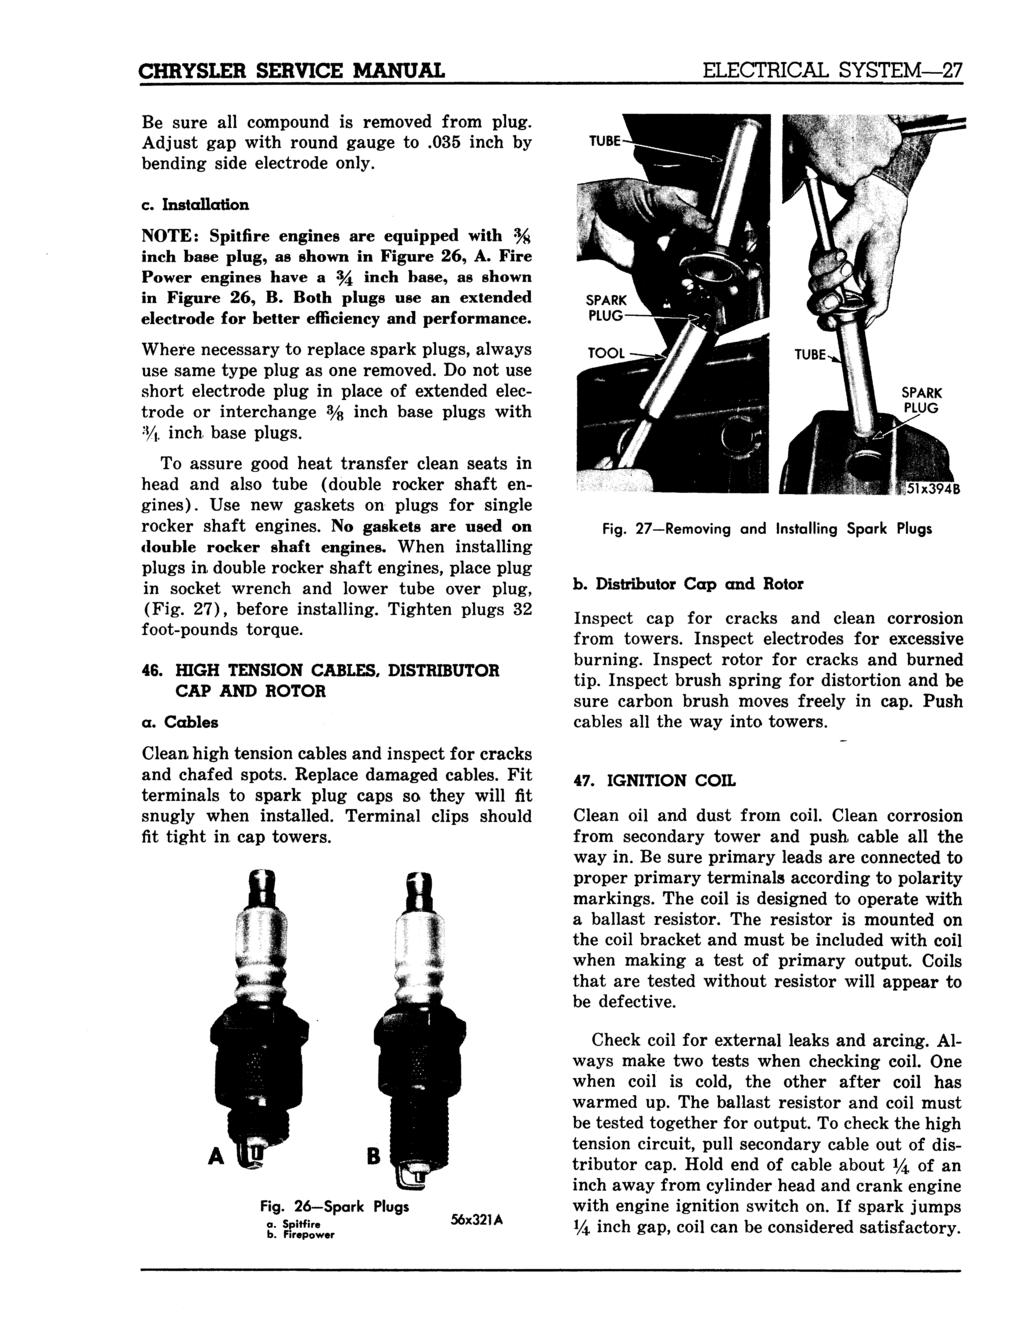 CHRYSLER SERVICE MANUAL CTRICAL SYSTEM 27 Be sure all compound is removed from plug. Adjust gap with round gauge to.035 inch by bending side electrode only. c. Installation NOTE: Spitfire engines are equipped with % inch base plug, as shown in Figure 26, A.